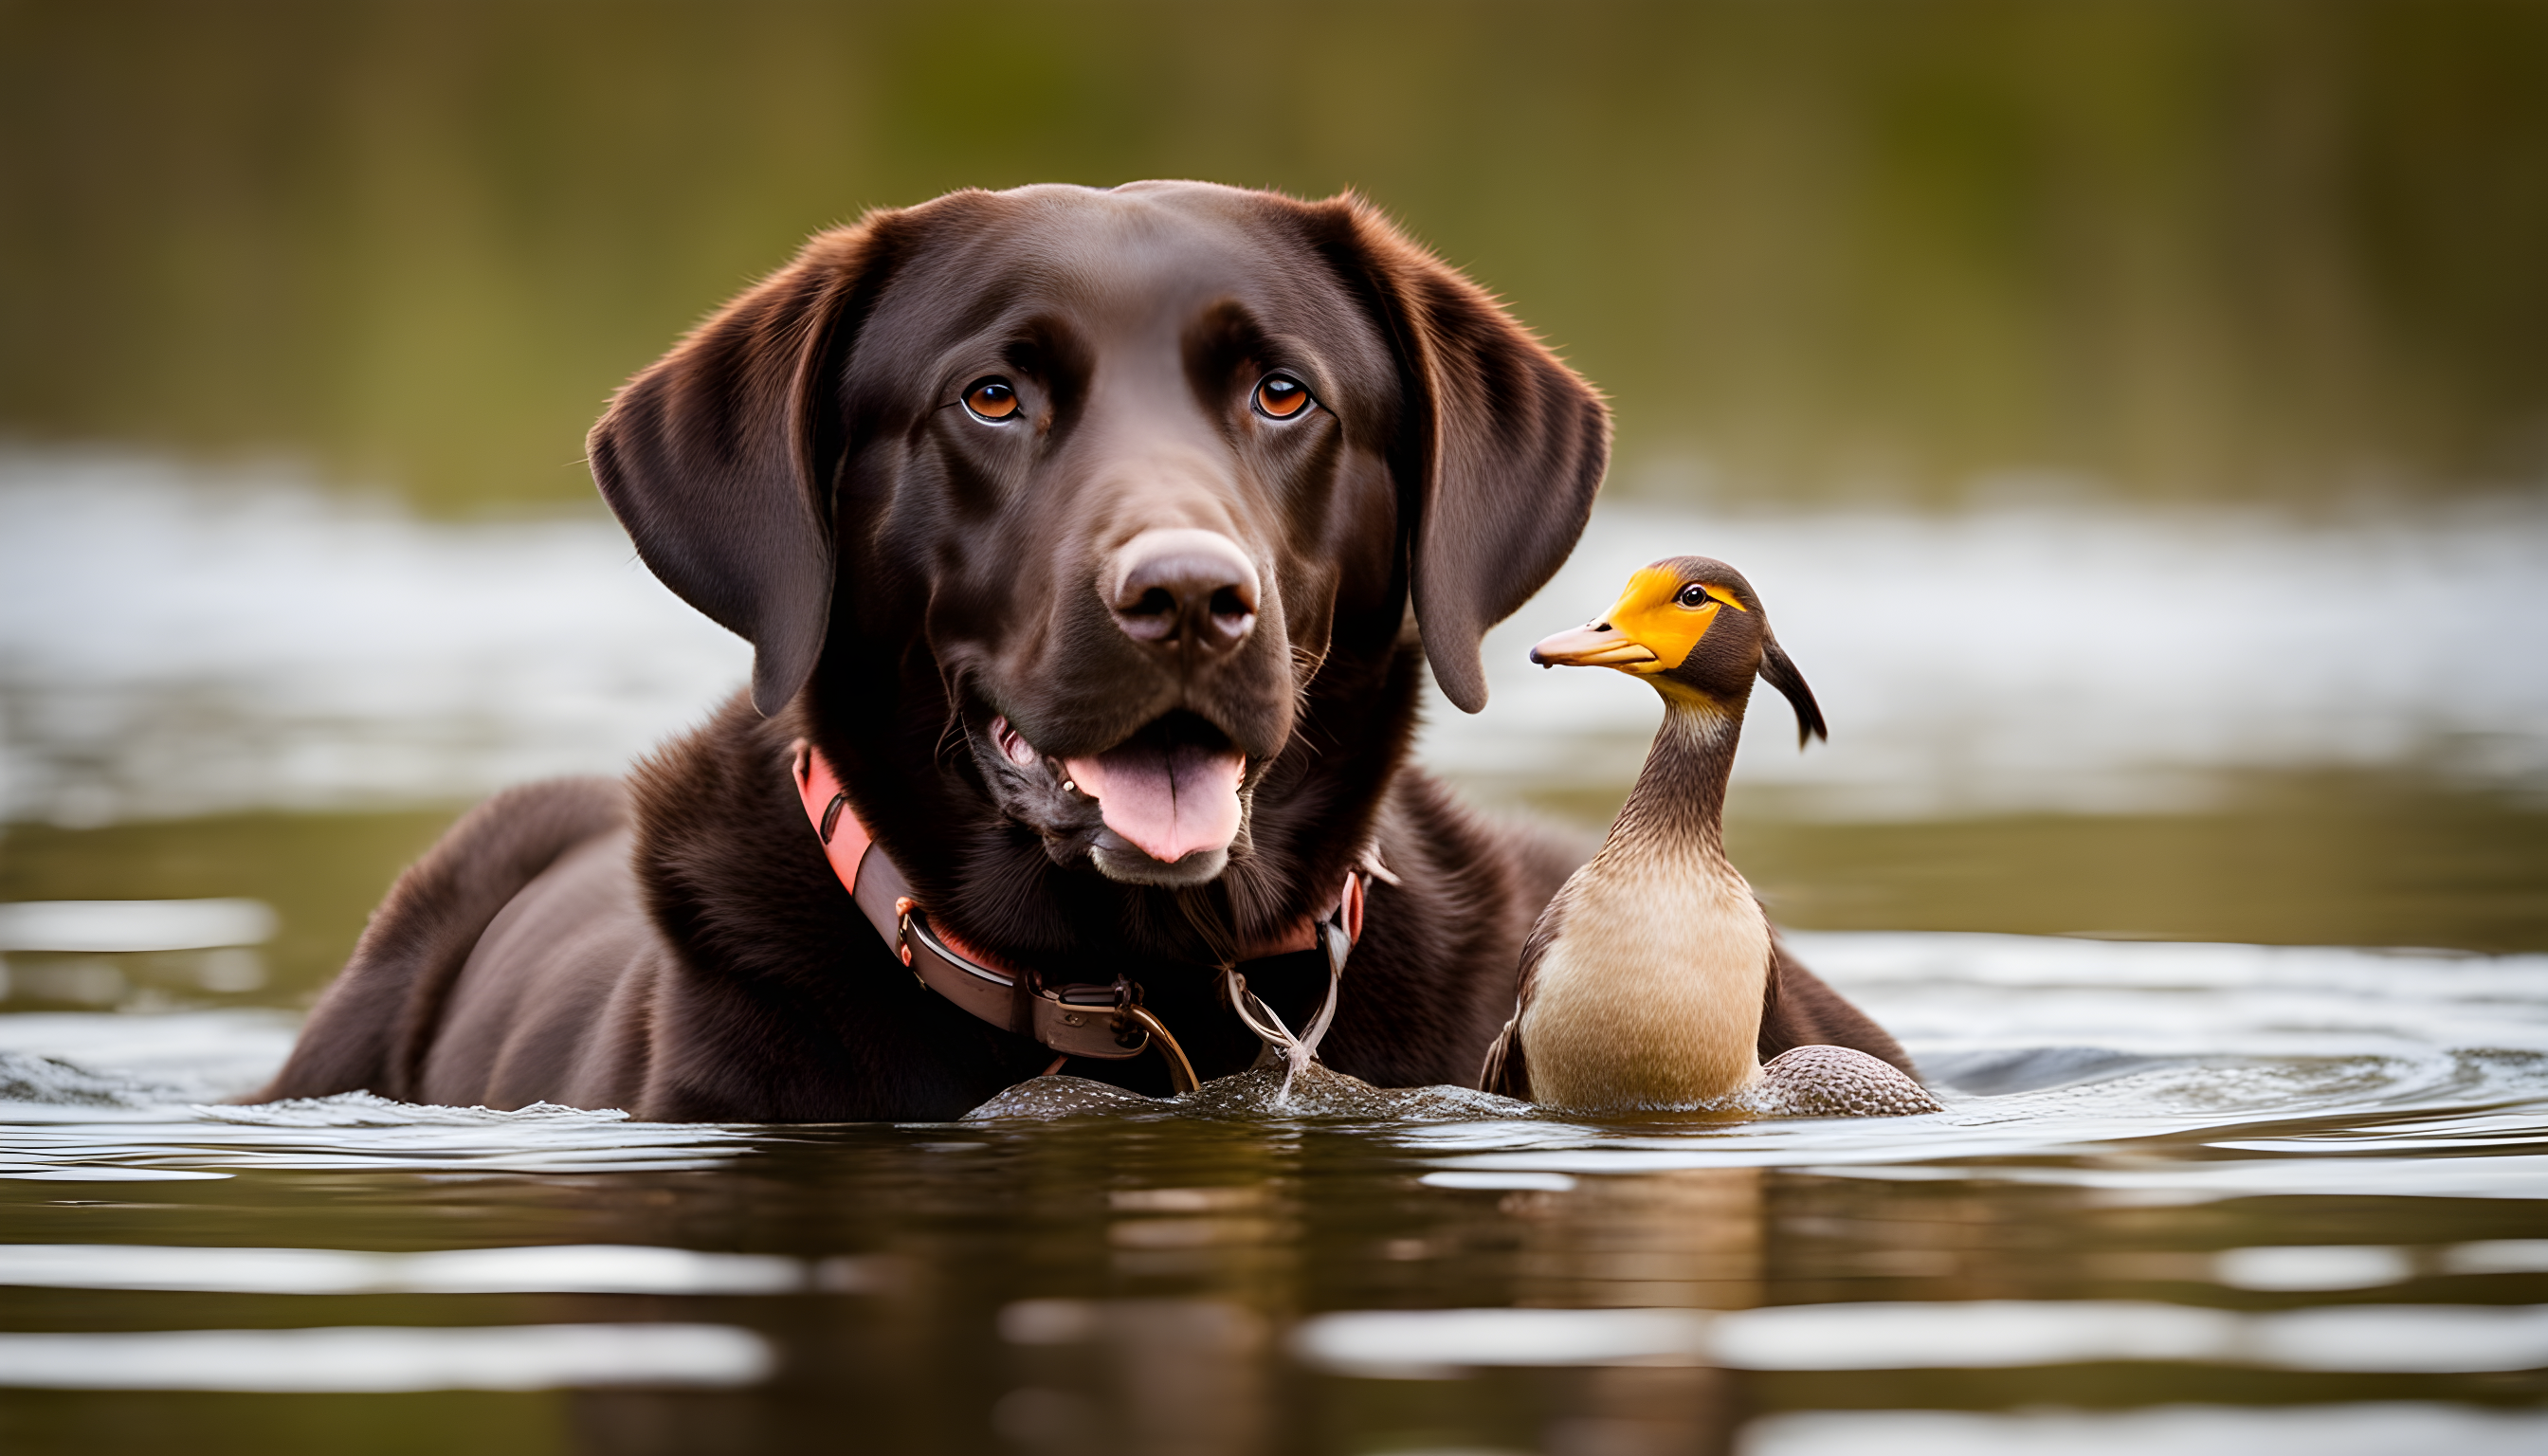 An English Chocolate Lab proudly holding a fetched duck, exemplifying its natural hunting prowess